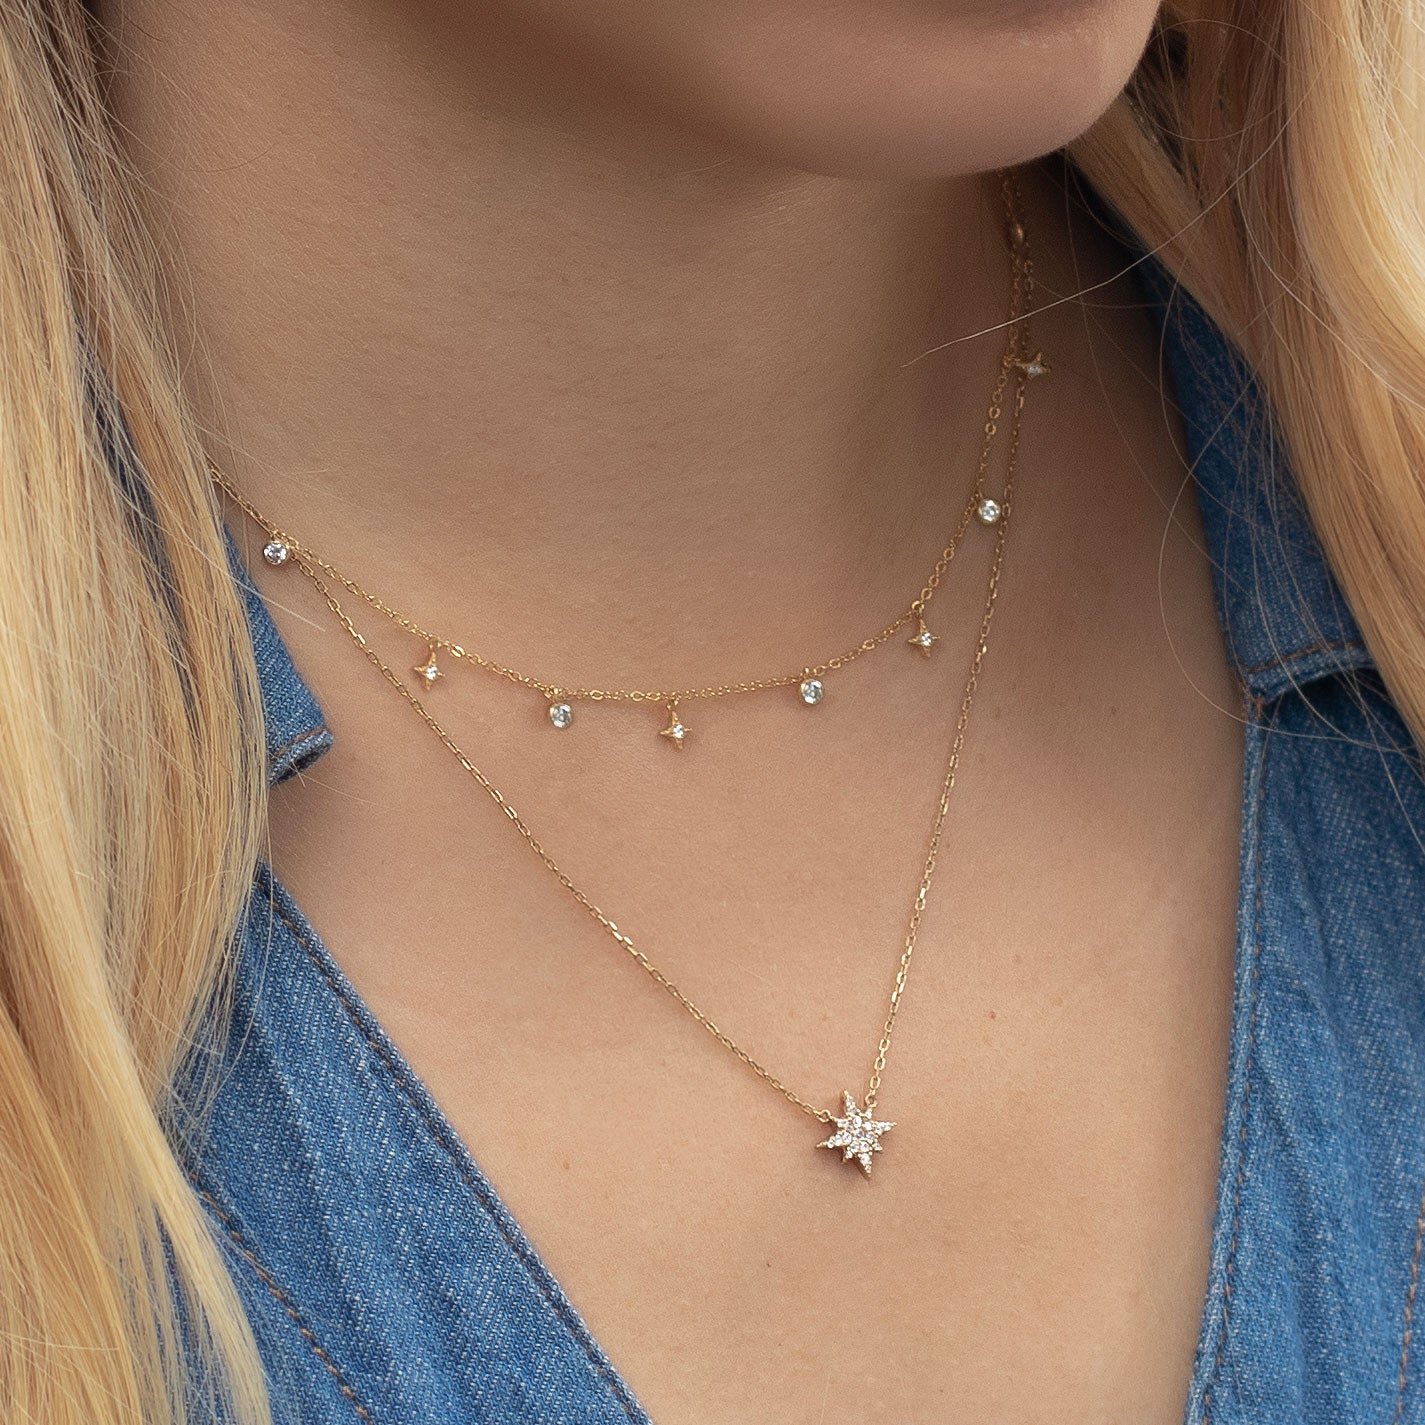 woman wearing  two layered gold necklace with dangle crystals and star pendant